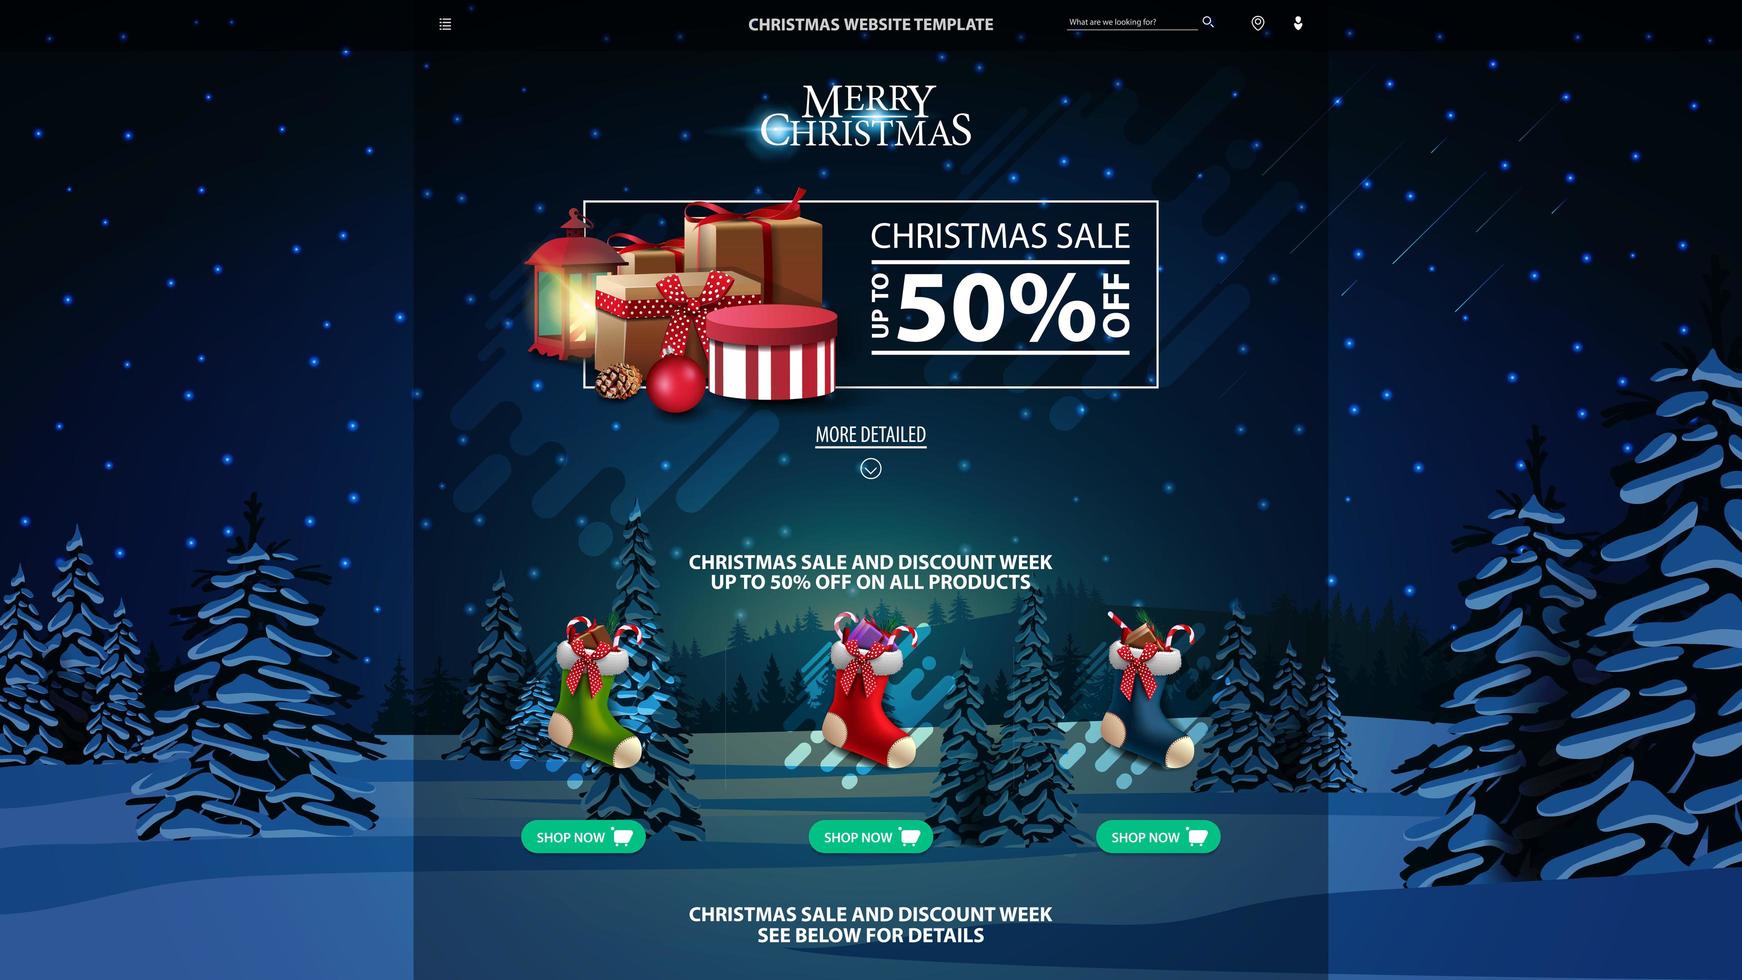 Christmas website template with discount banner vector